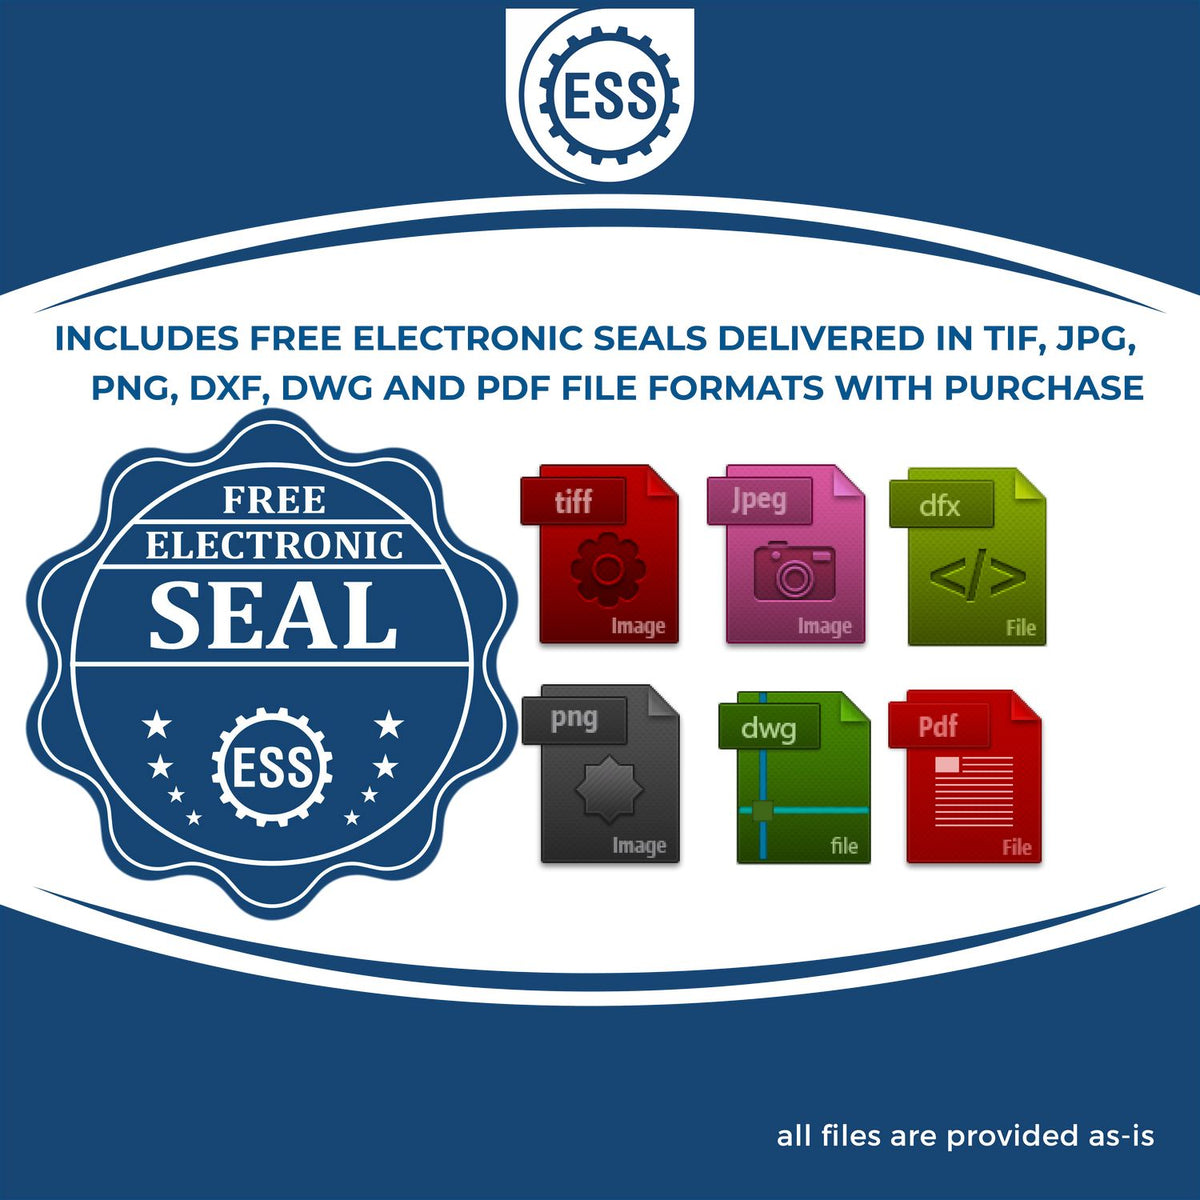 An infographic for the free electronic seal for the Heavy Duty Cast Iron Mississippi Land Surveyor Seal Embosser illustrating the different file type icons such as DXF, DWG, TIF, JPG and PNG.